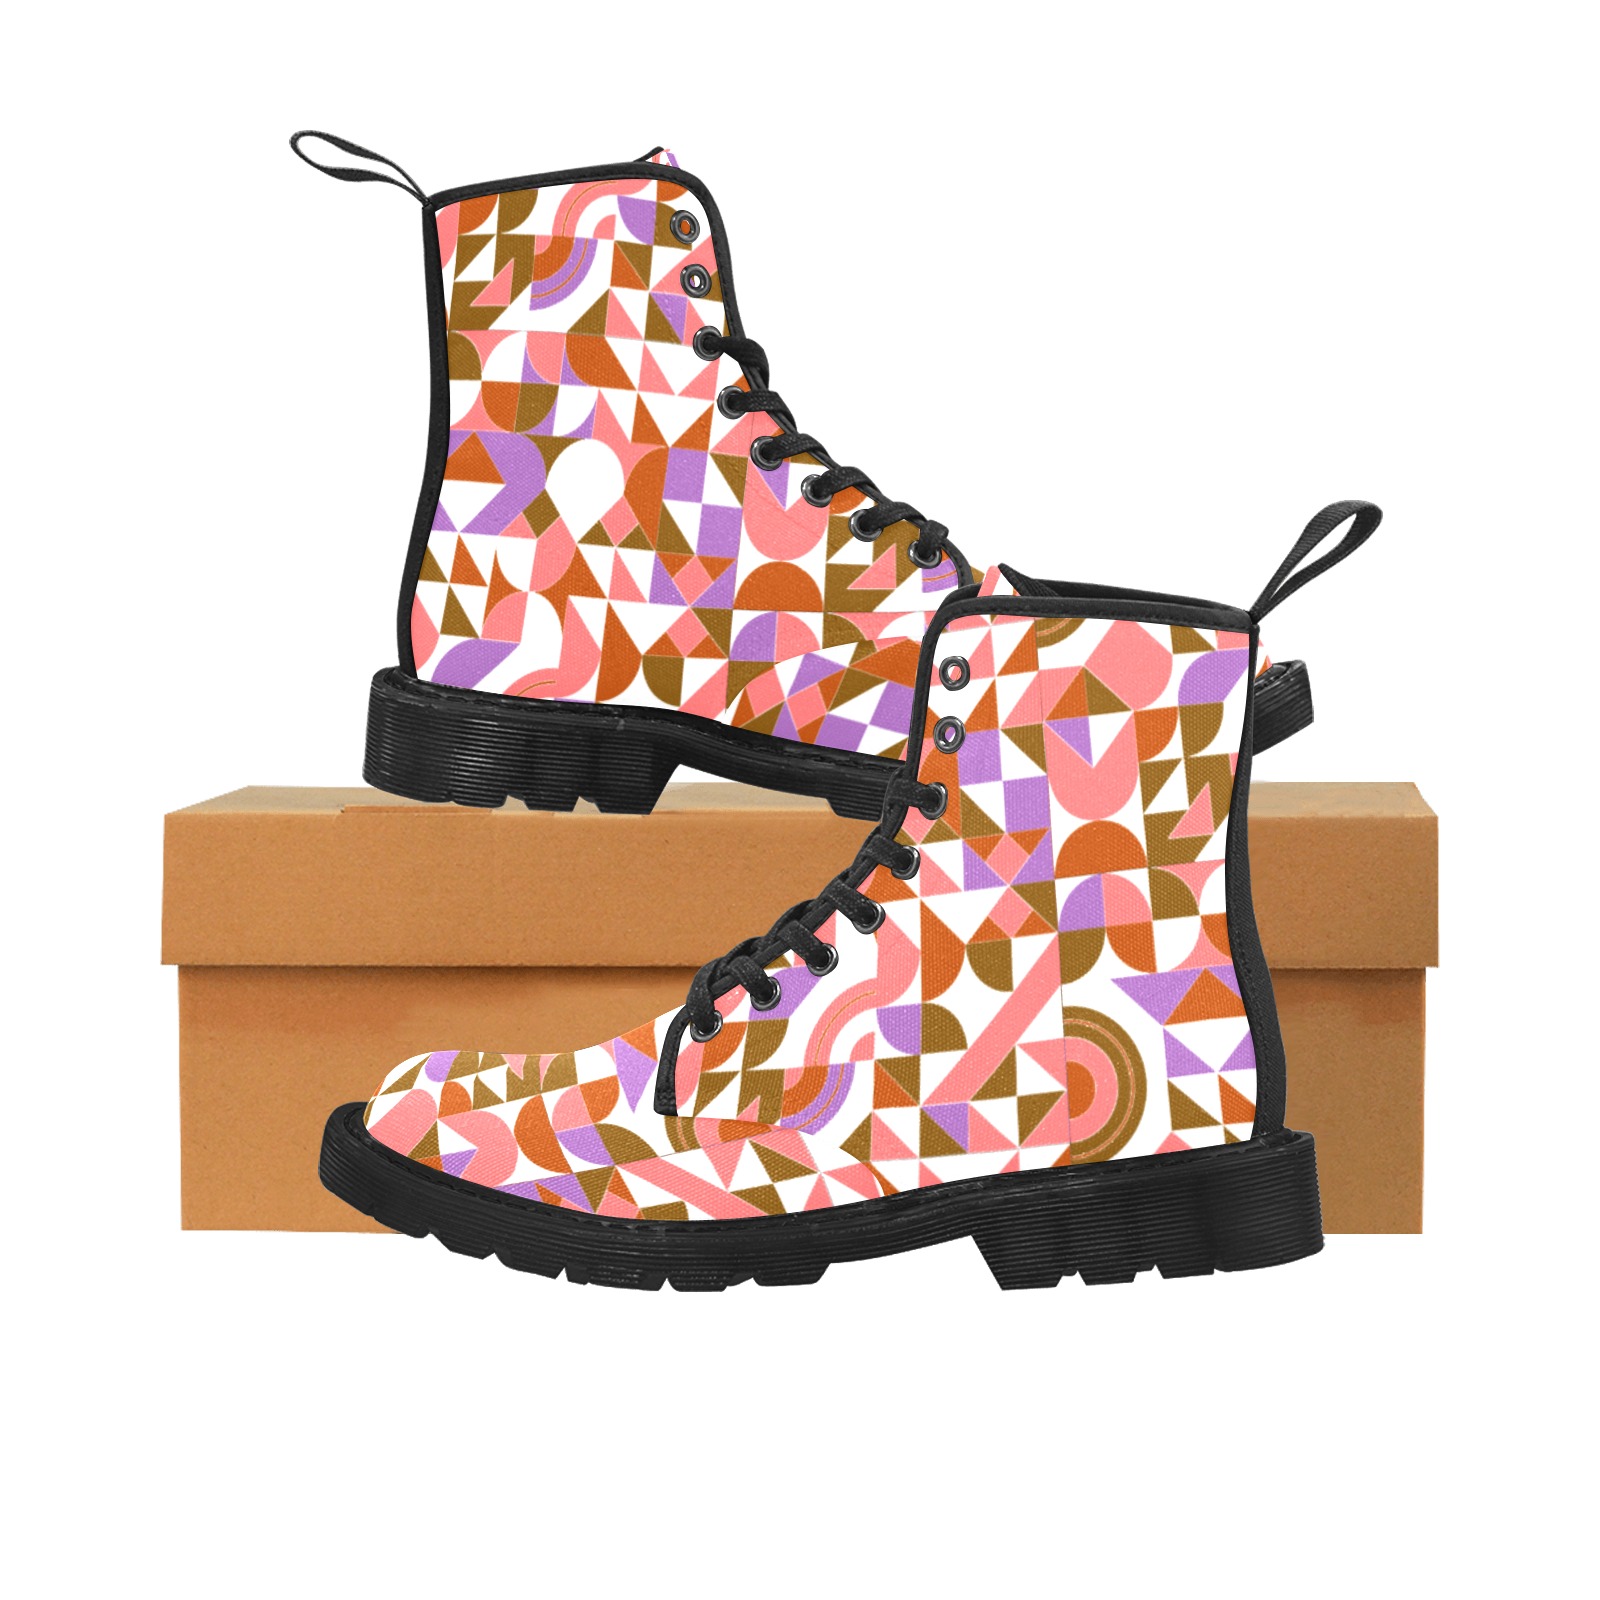 geomattric colorful patterns conceptual Art - Abstract Neo Geo graphic design (142) Martin Boots for Women (Black) (Model 1203H)